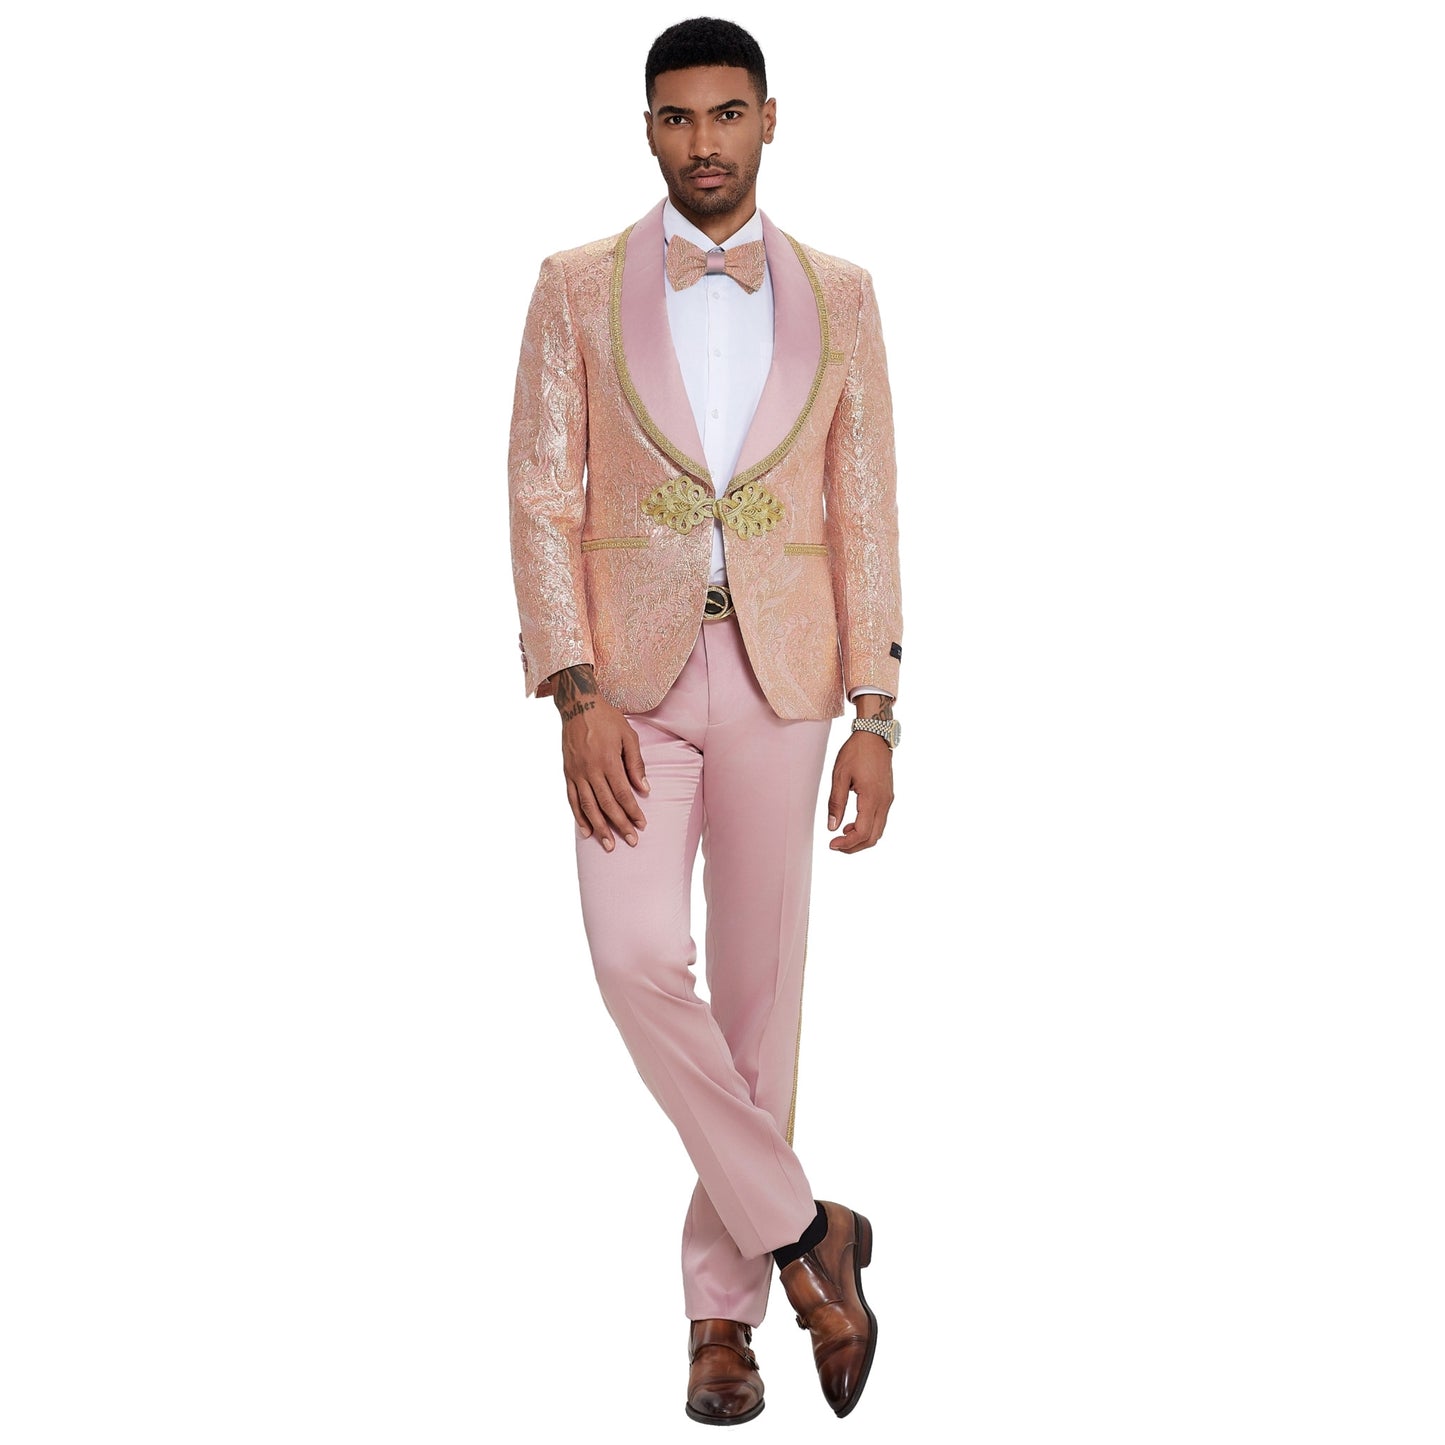 Gold and Pink Design Tuxedo, Pink Satin Pants, Pink Lapel with Gold Trim, Gold and Pink Bowtie, Slim Fit Tuxedo Style.